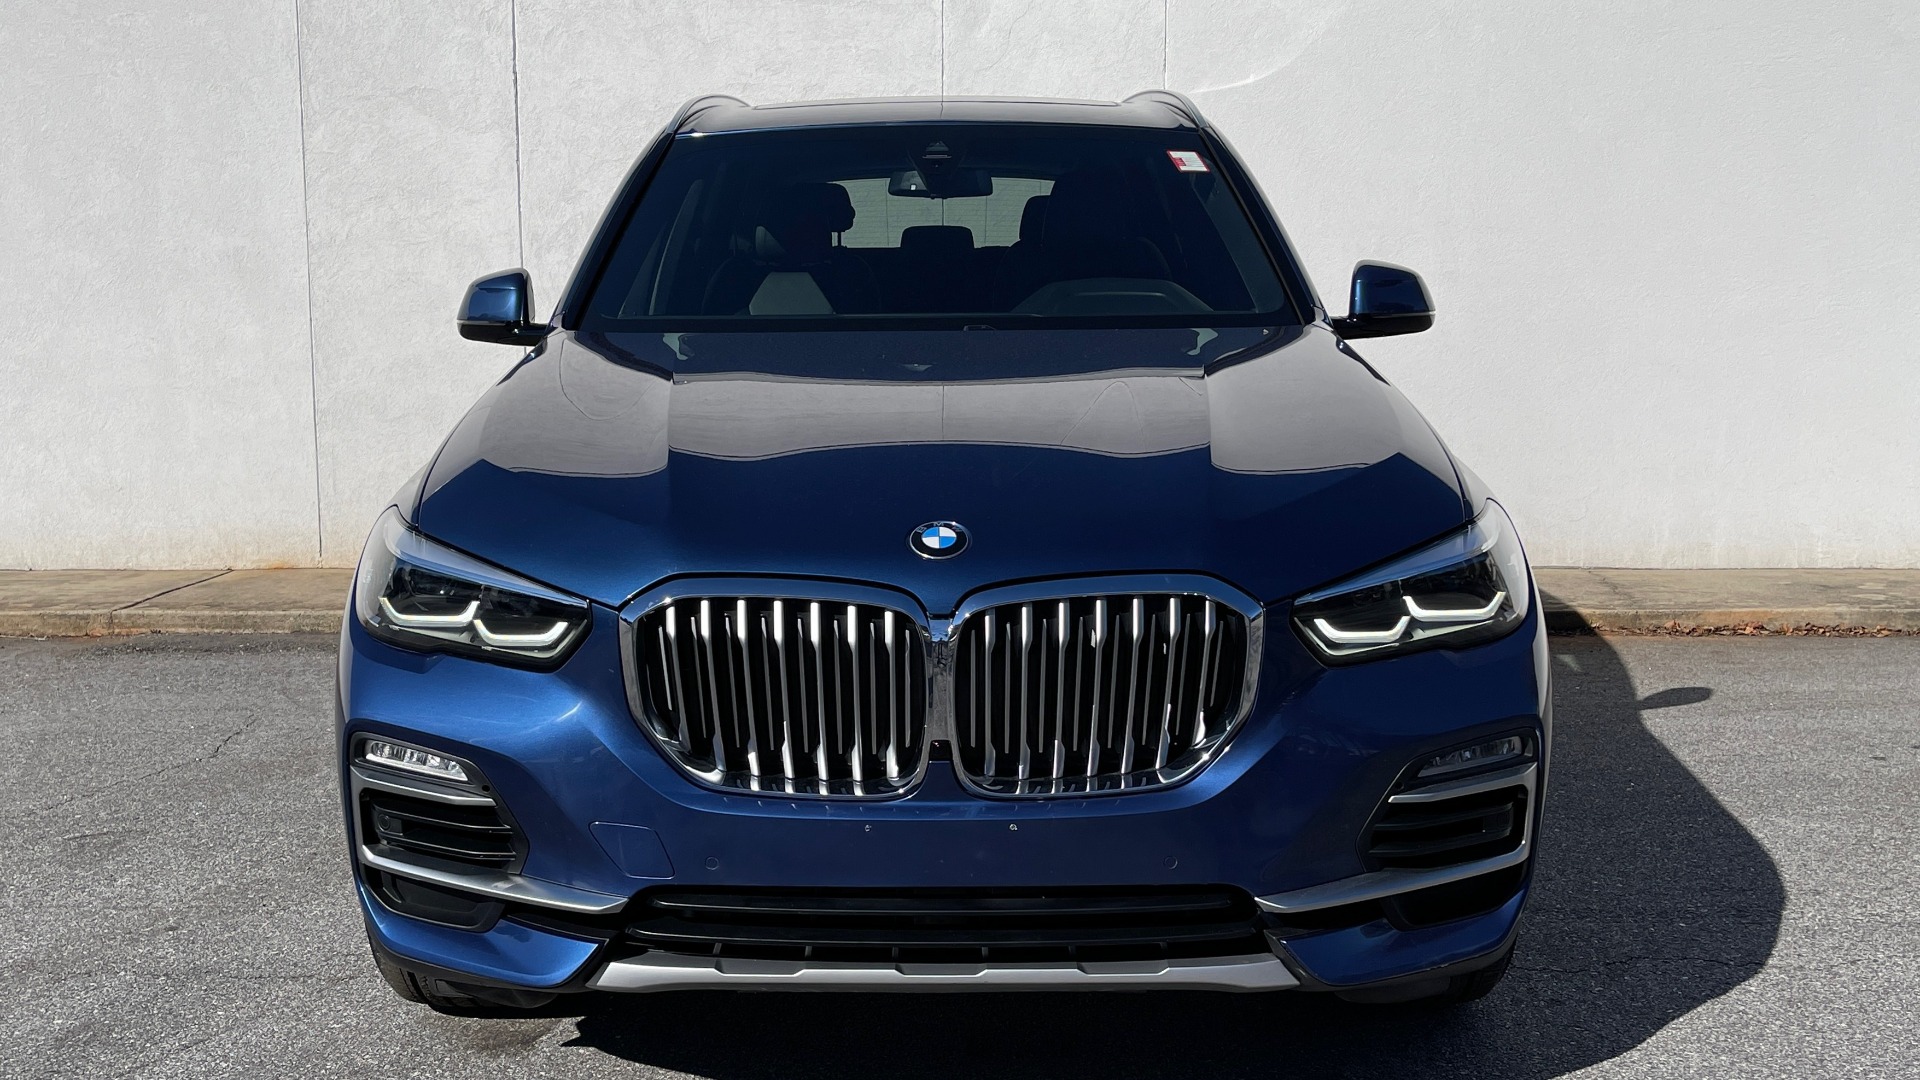 Used 2019 BMW X5 XDRIVE40I / CONVENIENCE PKG / REMOTE START / TOWING / H/K SND / REARVIEW for sale $57,395 at Formula Imports in Charlotte NC 28227 11